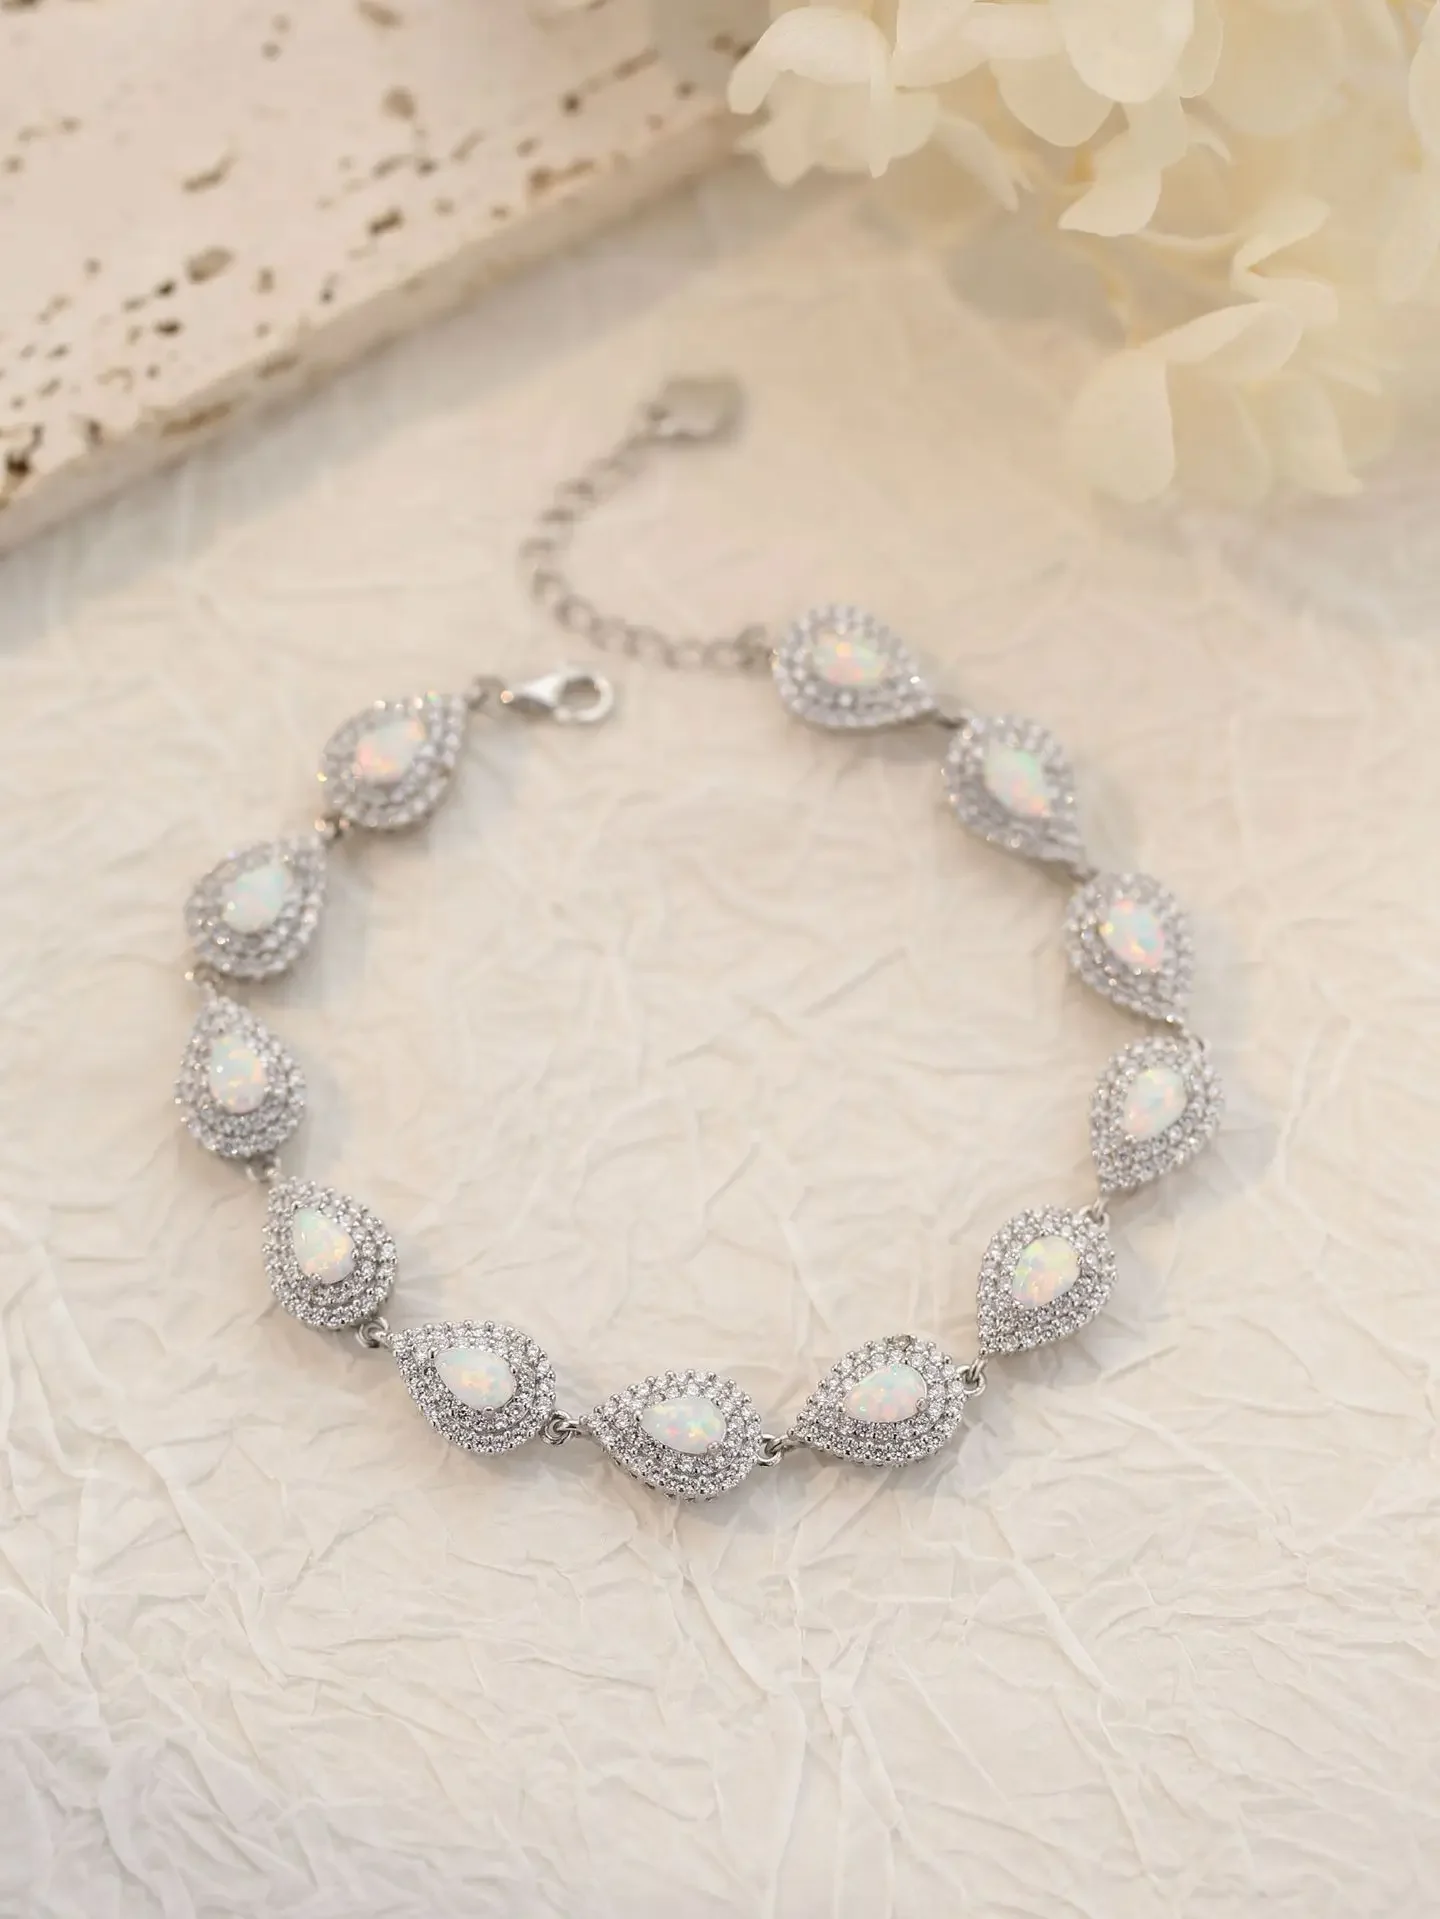 

Pure 925 Silver Droplet Bracelet with Shining Zircon and White Opal,Classic Sweet Style for Party or Dating Wear